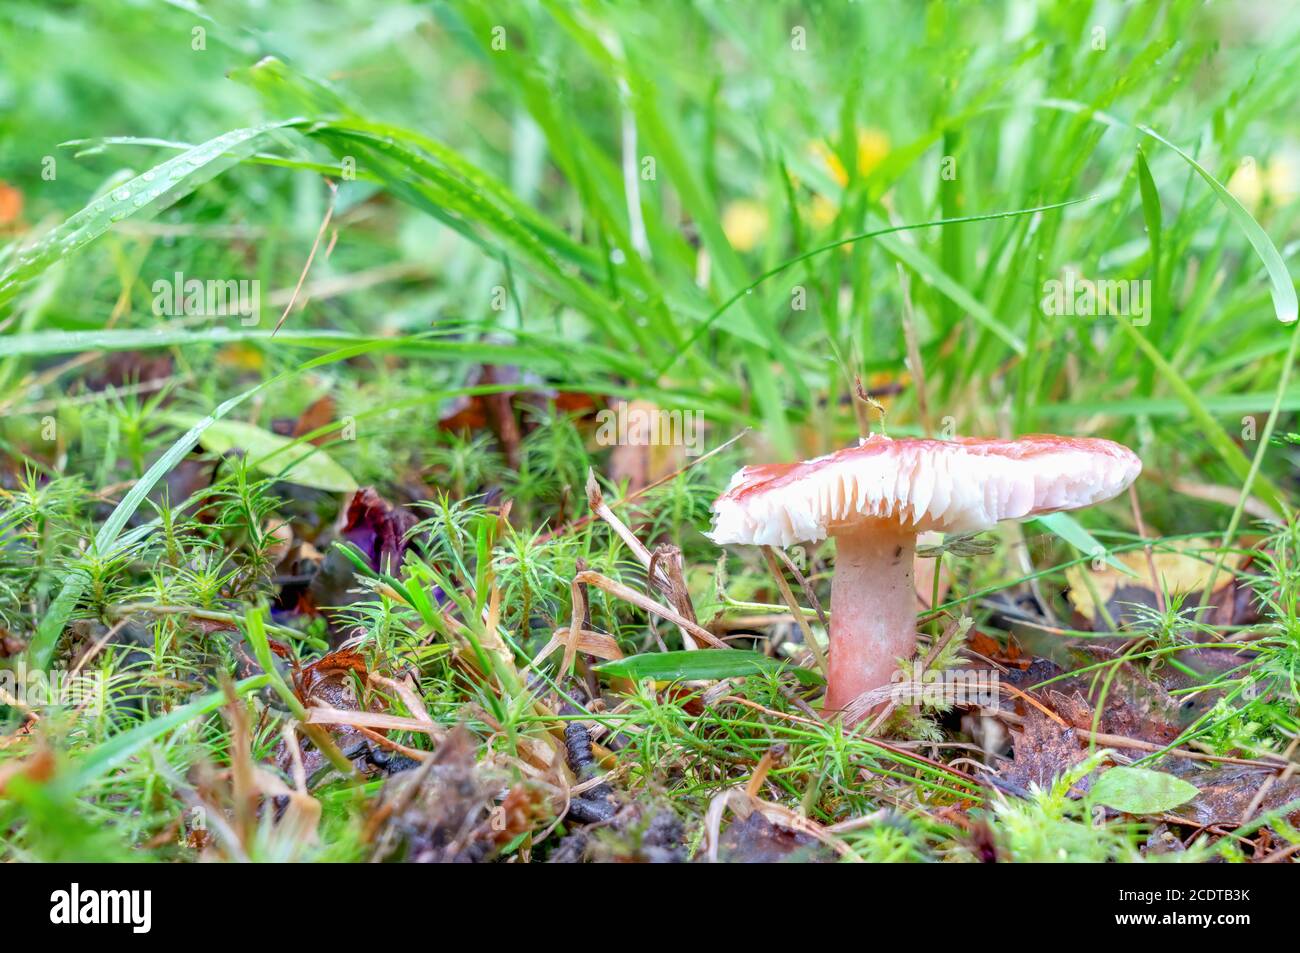 BEautiful light rose colored mushroom russula was damaged by lan slugs or wild animal. This edible mushroom growing out of a layer of moss and grass, Stock Photo